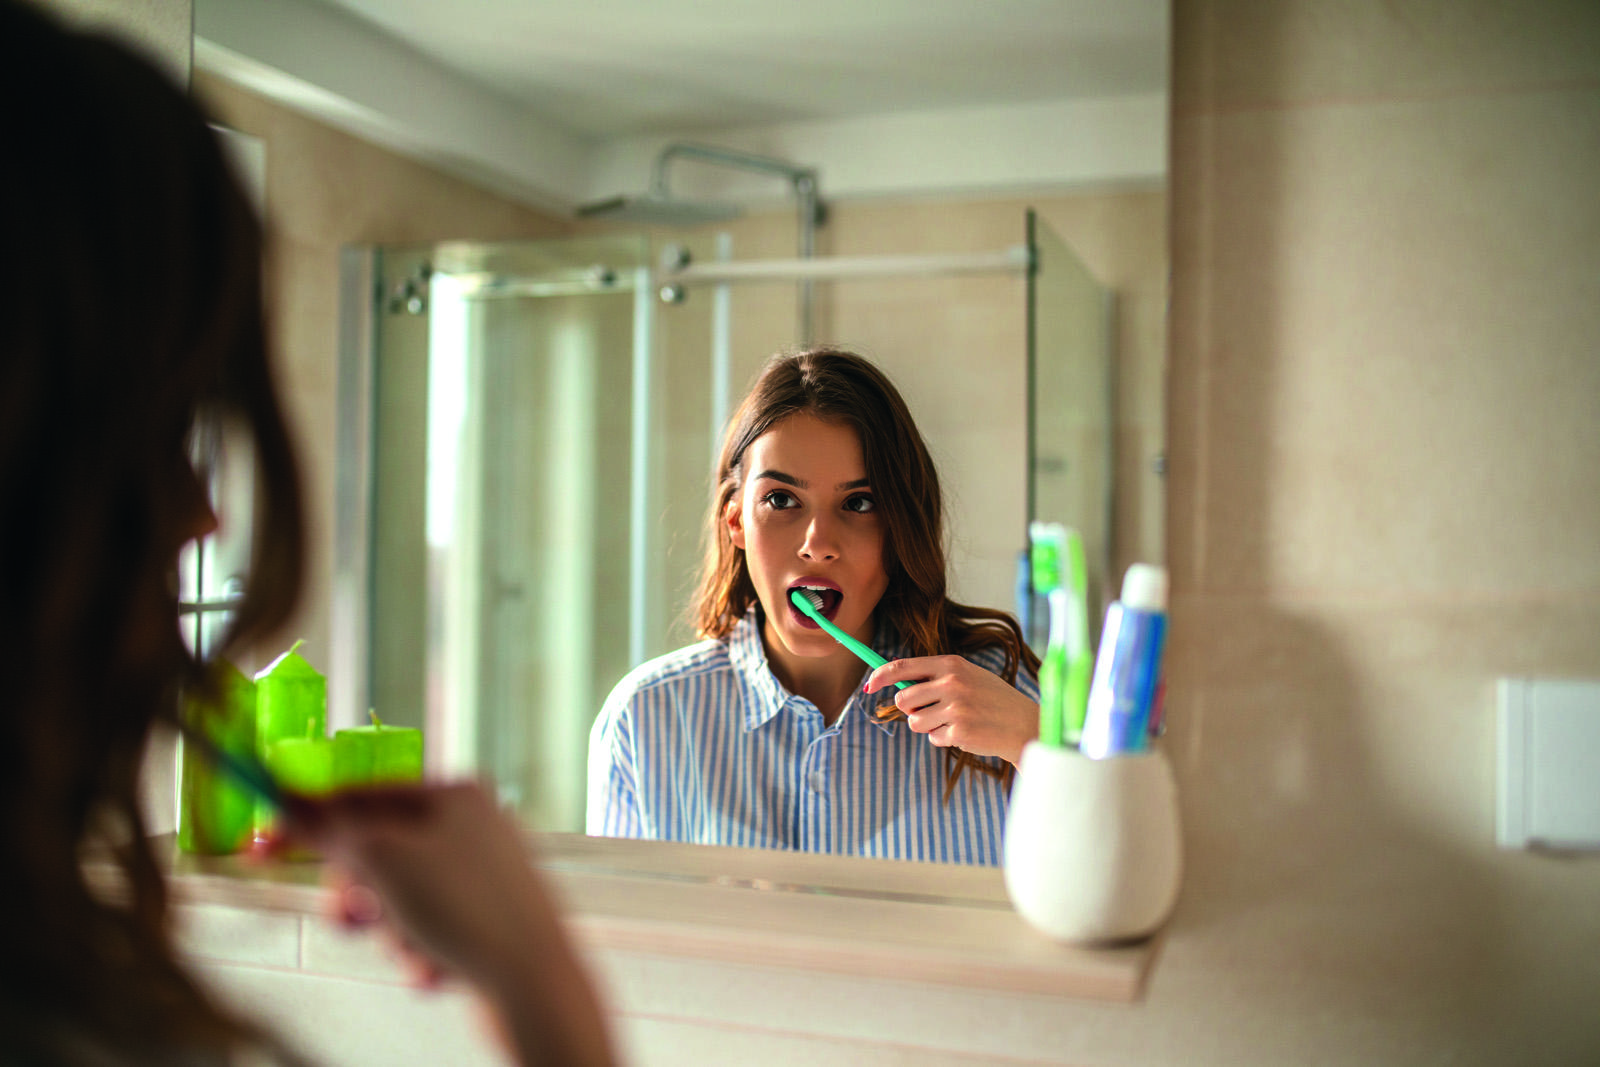 Young brunette woman brushing her teeth in a mirror wearing striped pyjamas in a sunny bathroom